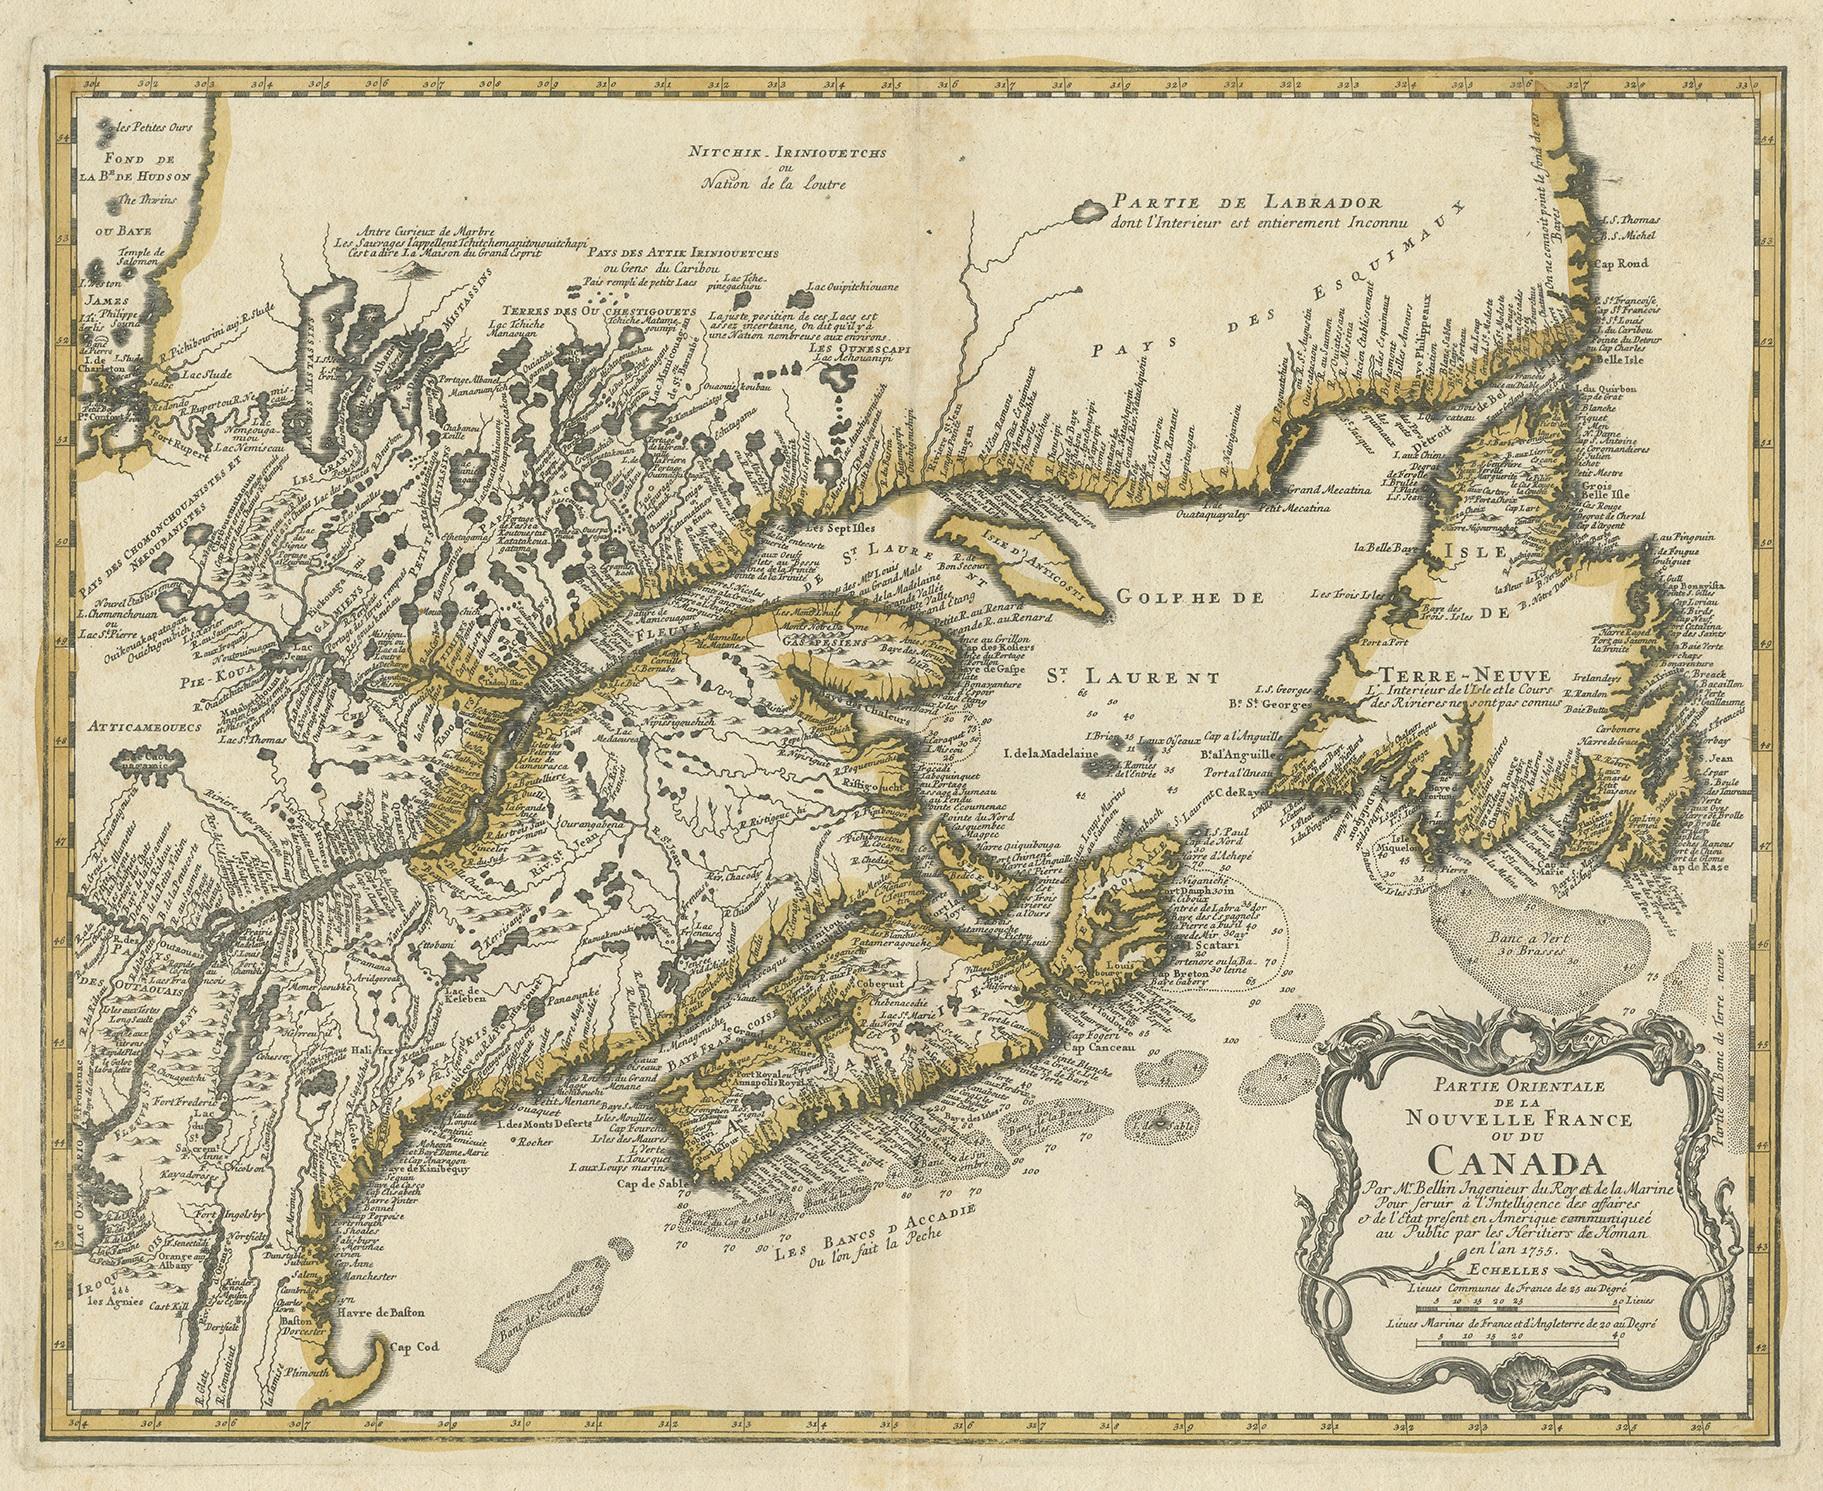 Antique map titled 'Partie Orientale de la Nouvelle France ou du Canada (..)'. Original antique map of New England and Eastern Canada made after J.N. Bellin. The map extends from Lake Ontario, the St. Lawrence River and Cape Cod in the South to